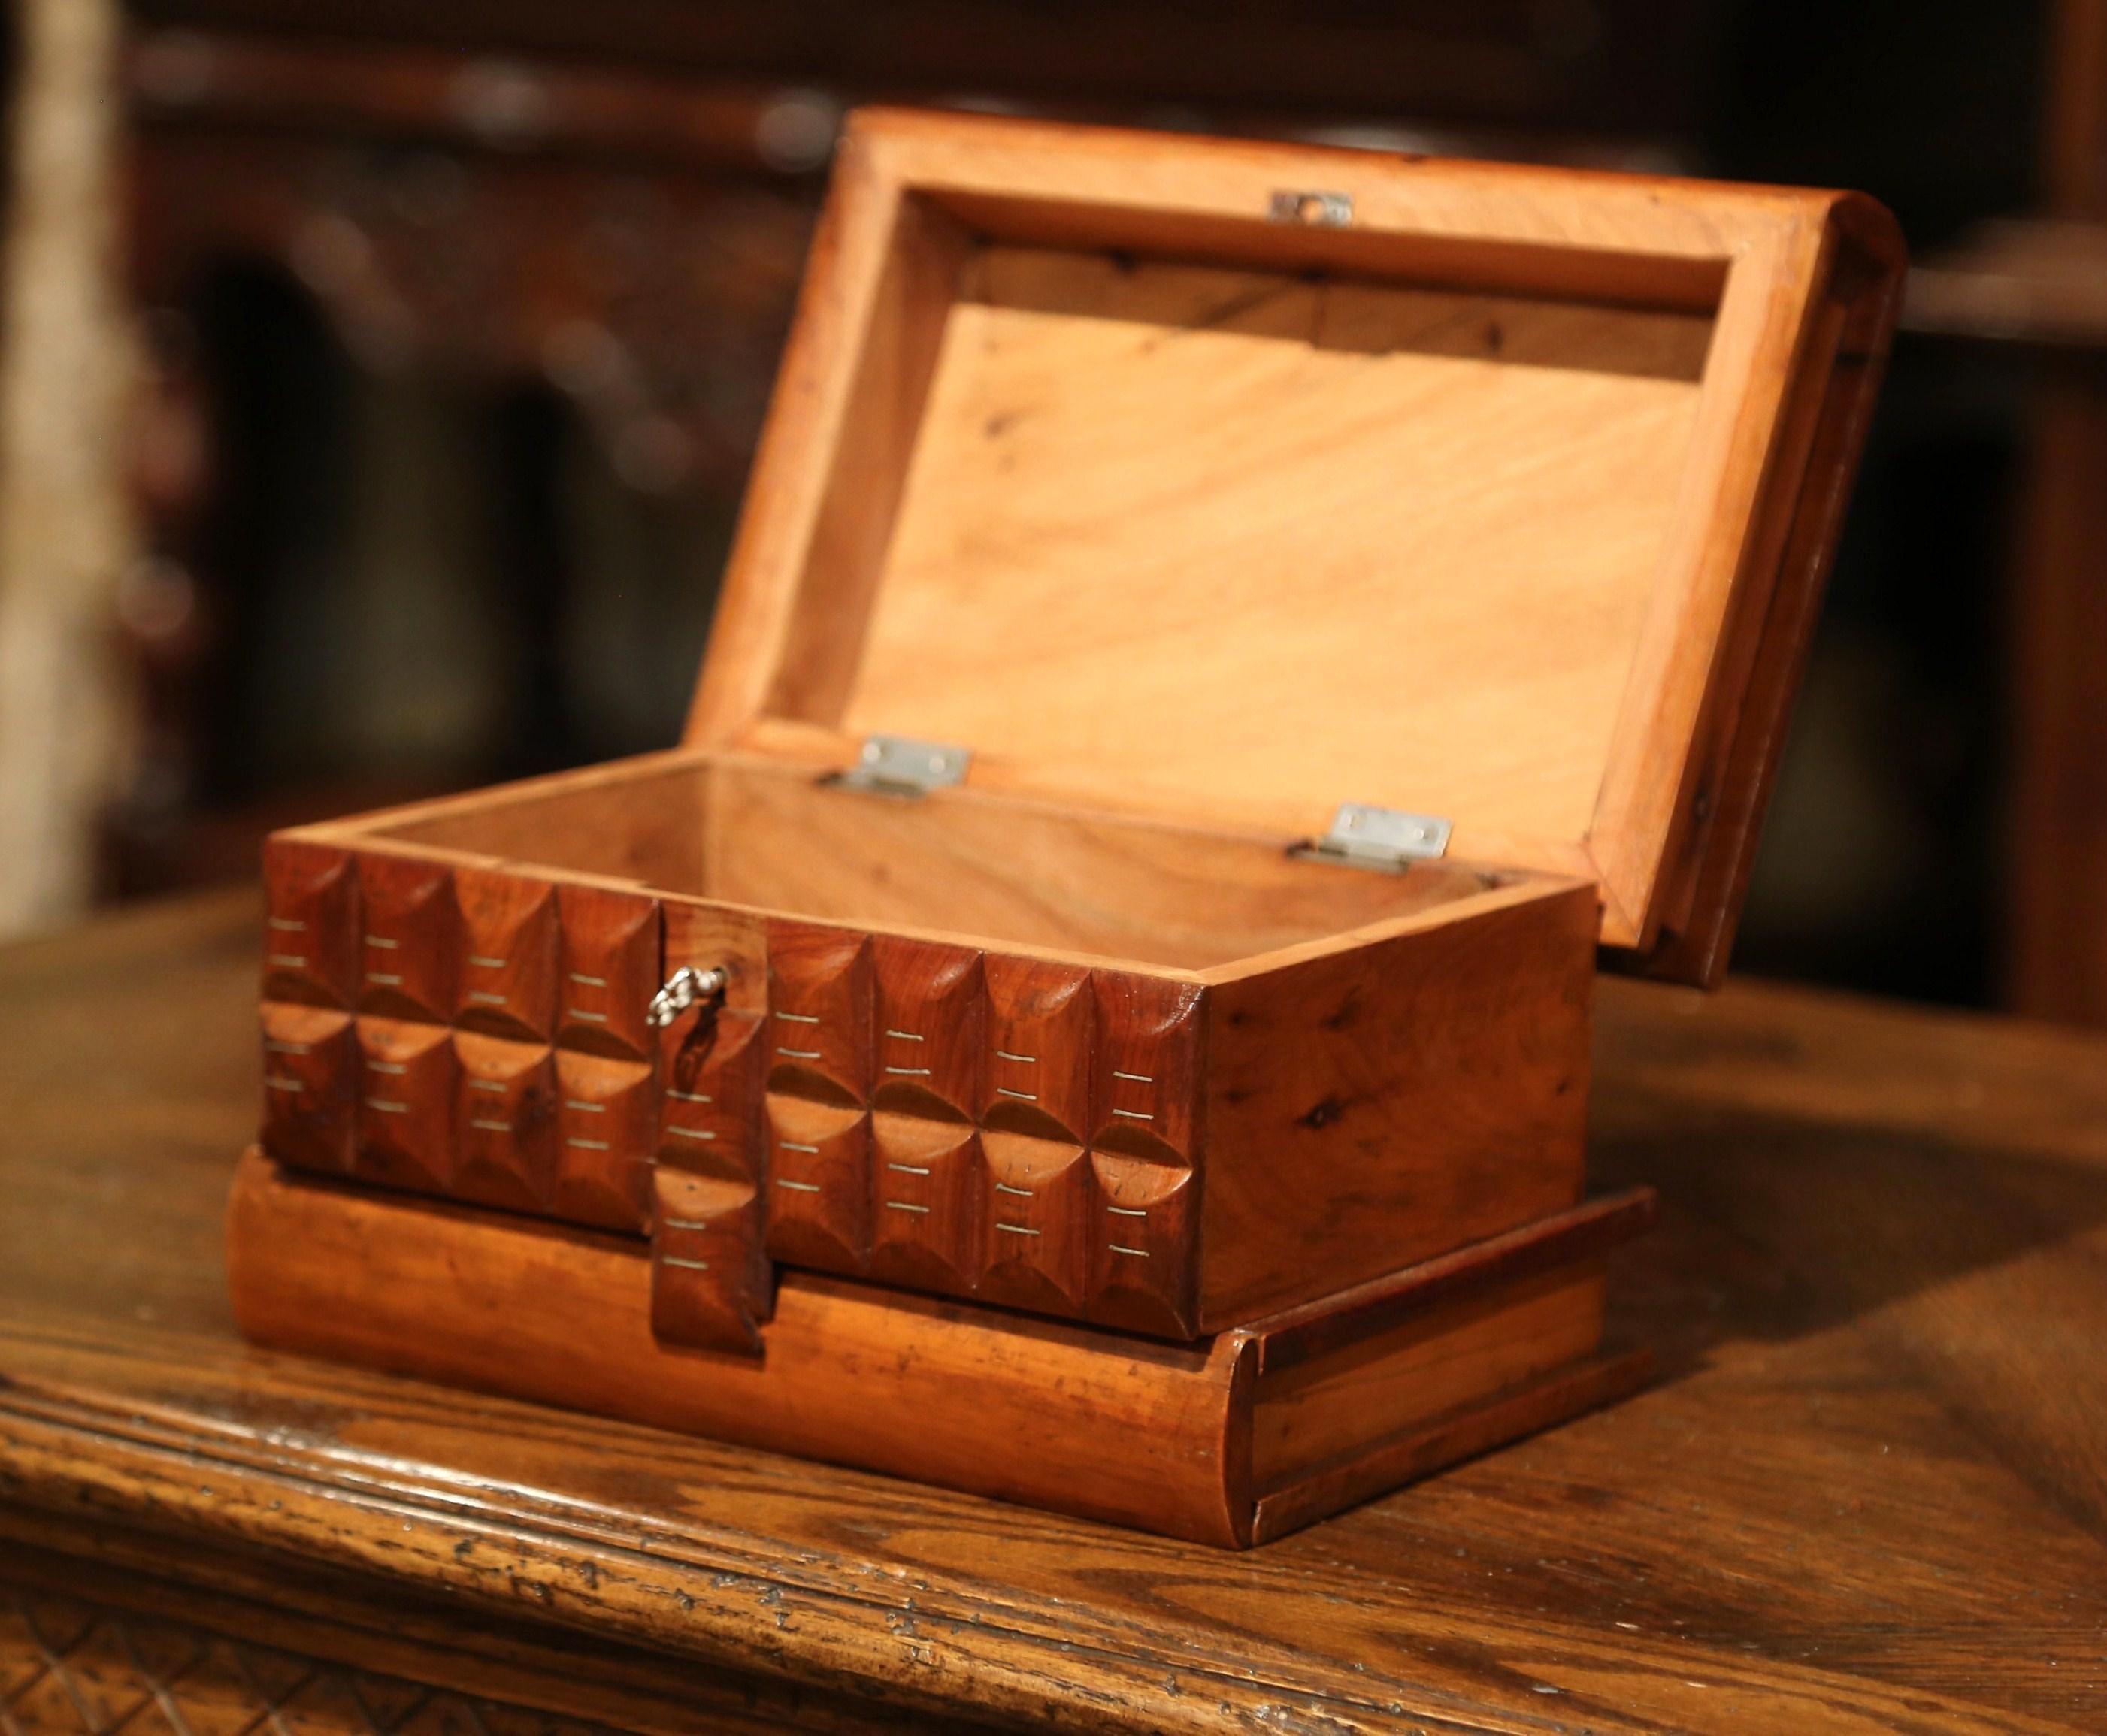 Hand-Carved 19th Century French Carved Olive Box with Secret Key Hole and Drawer Mechanism